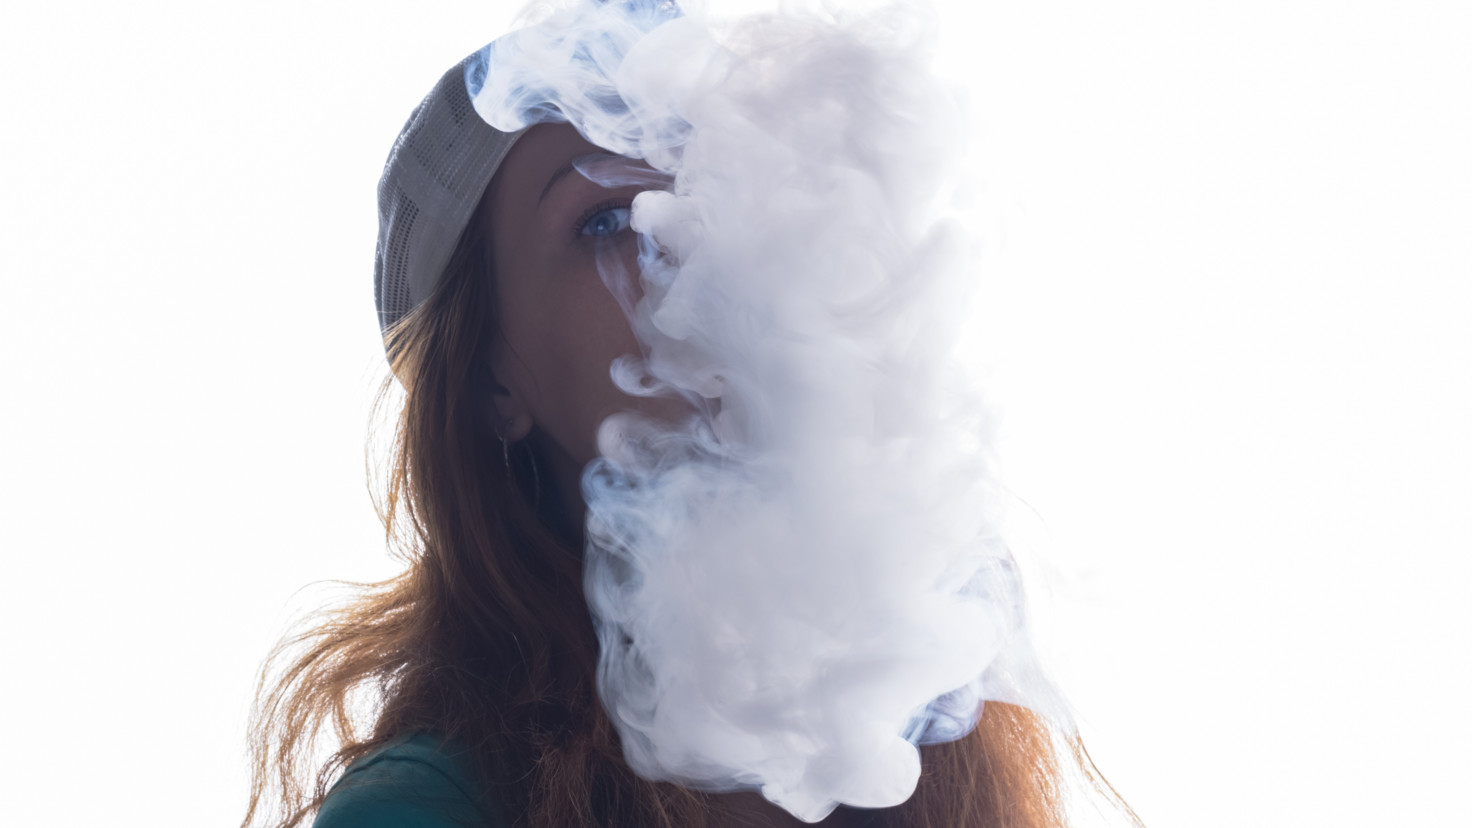 Vaping deaths: What does this mean for the e-cigarette industry?